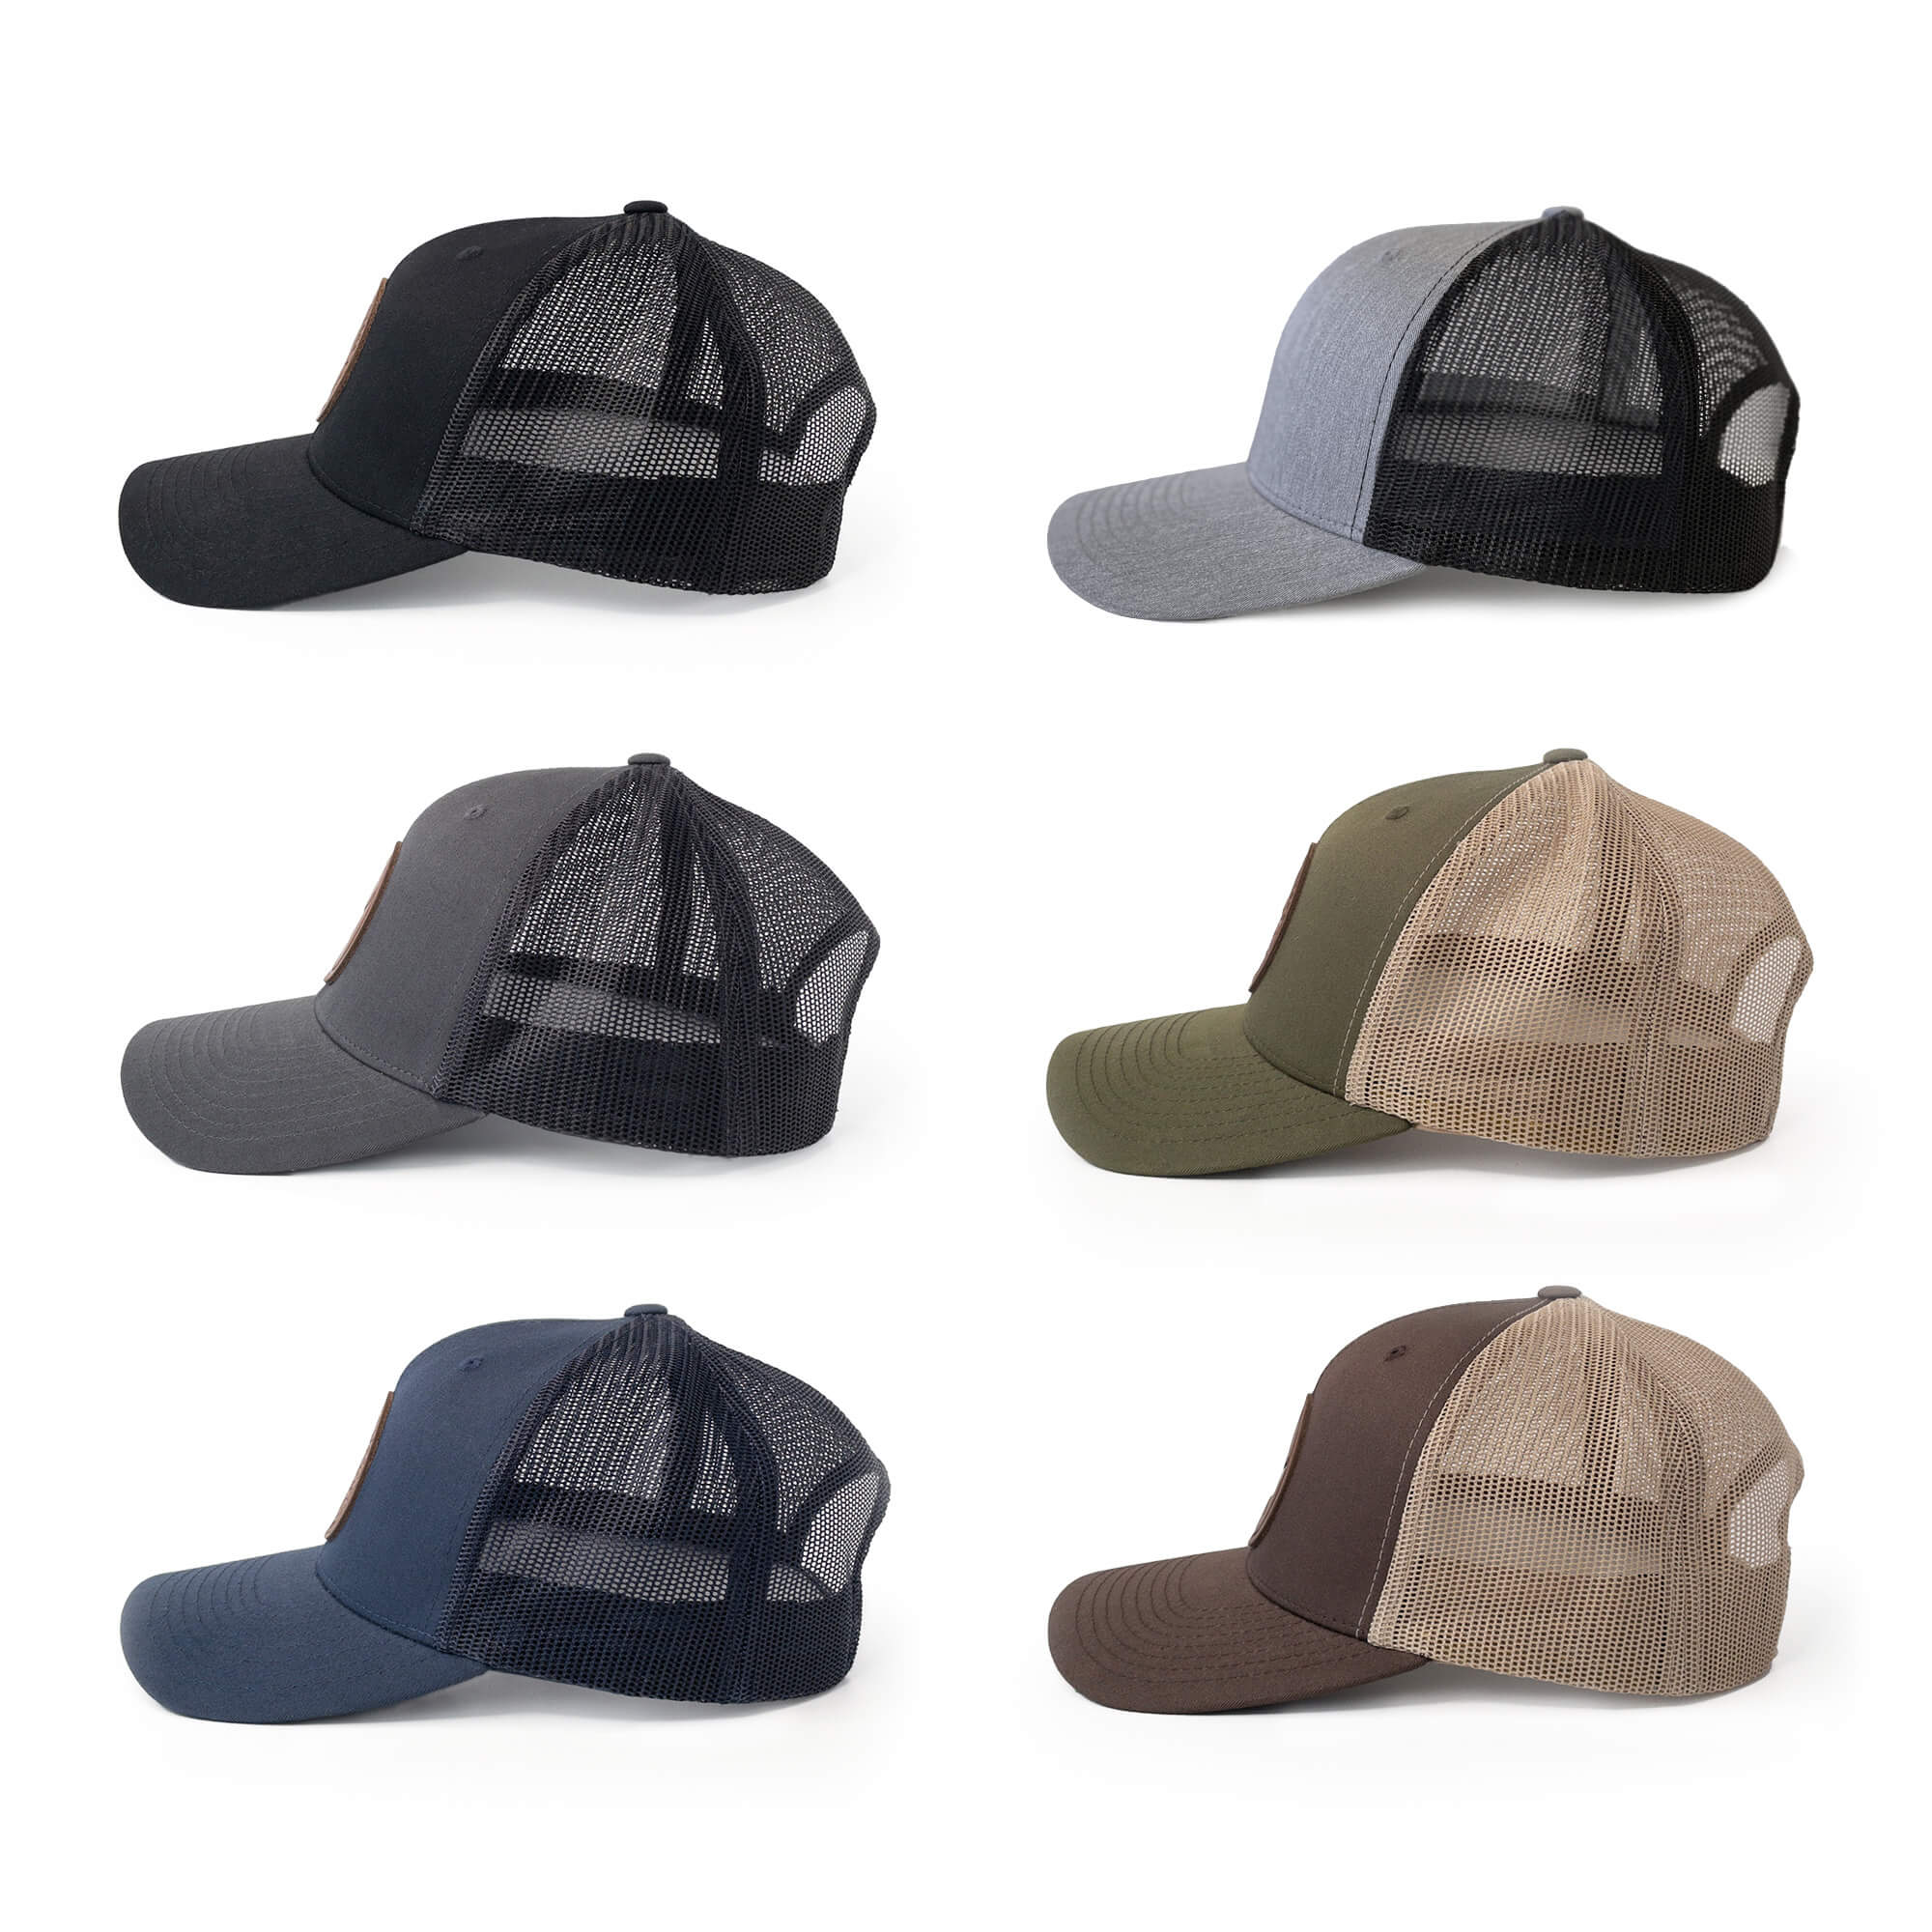 Leather patch trucker hats available in 6 colors | BLACK-003-001, CHARC-003-001, NAVY-003-001, HGREY-003-001, MOSS-003-001, BROWN-003-001